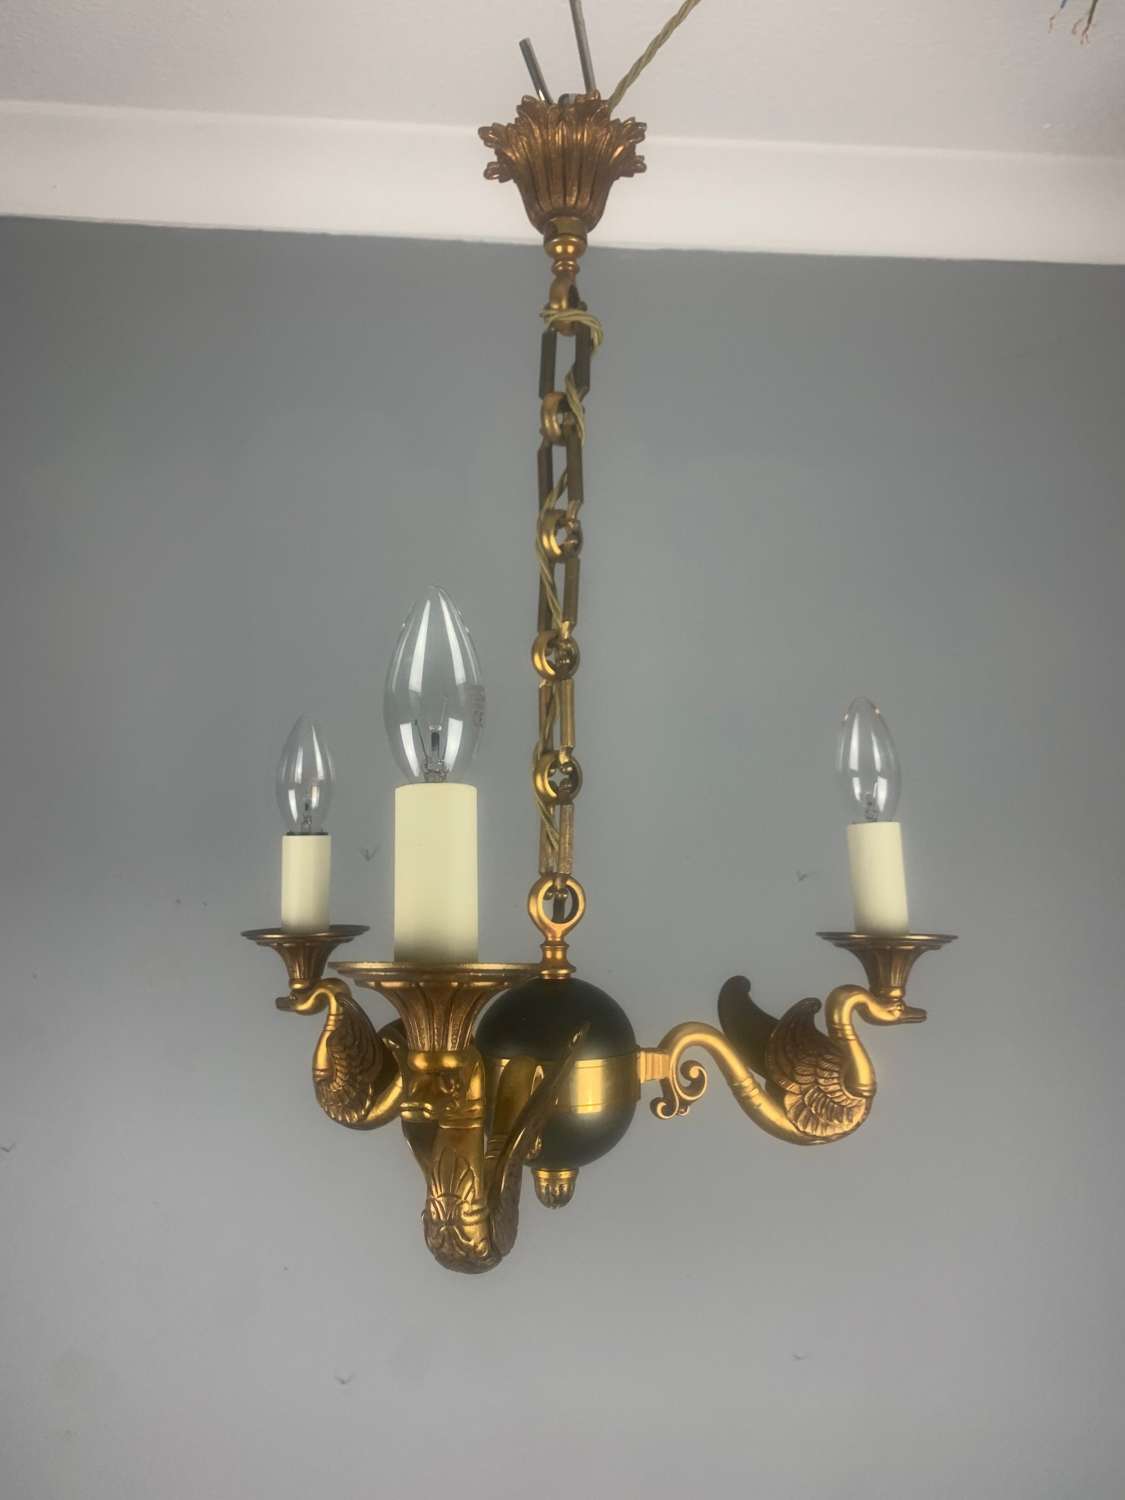 French Empire Antique Chandelier, Ceiling Light, 3 Arm